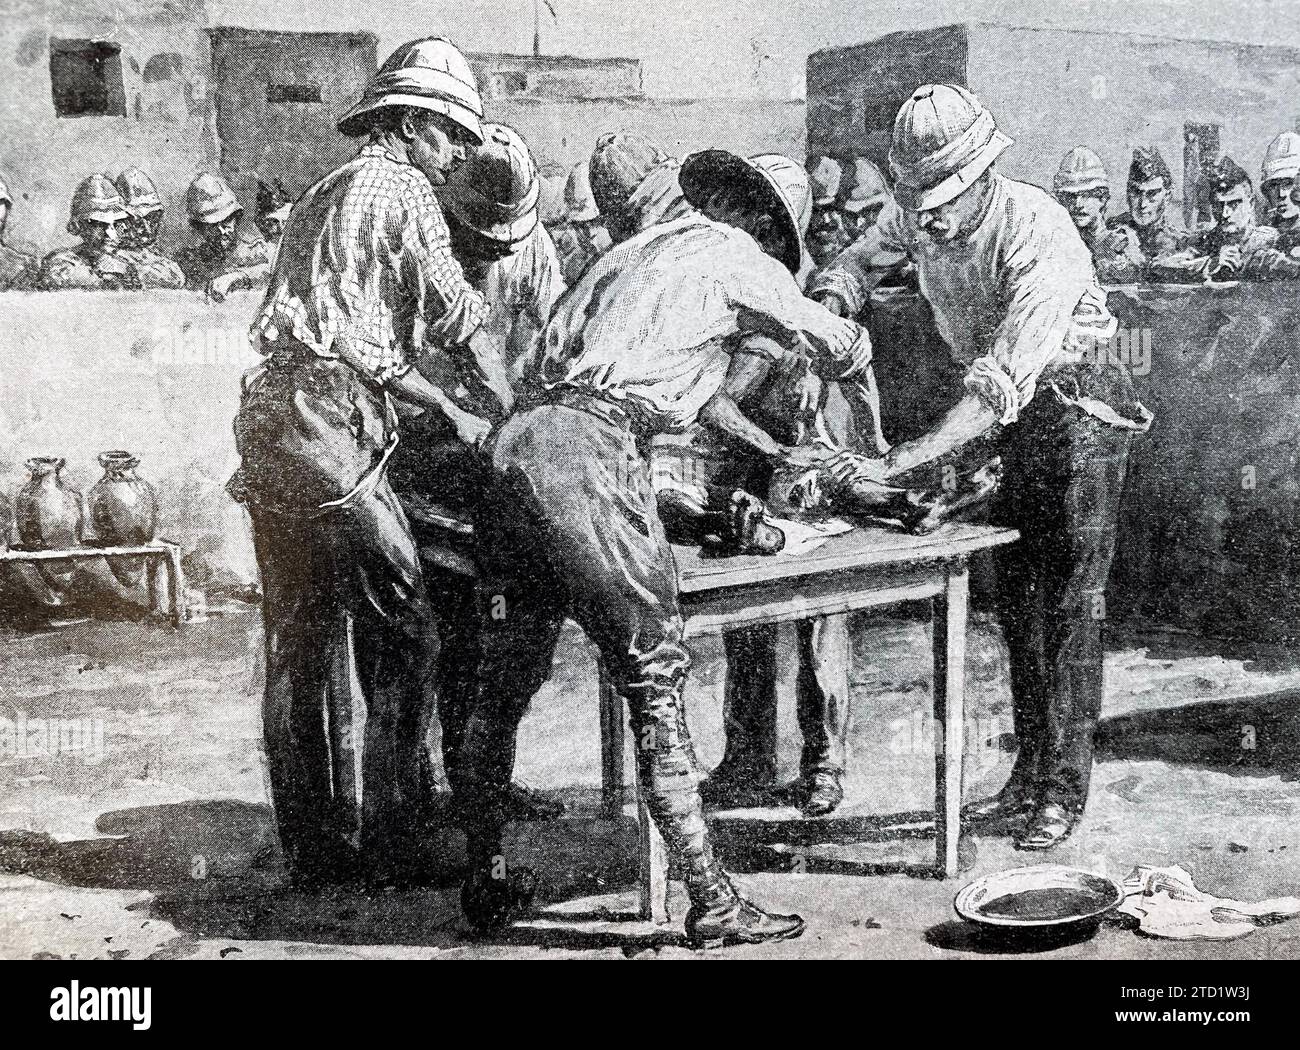 BATTLE OF ATBARA , Sudan, 8 April 1898. A wounded British soldier receives treatment watched by others. Stock Photo